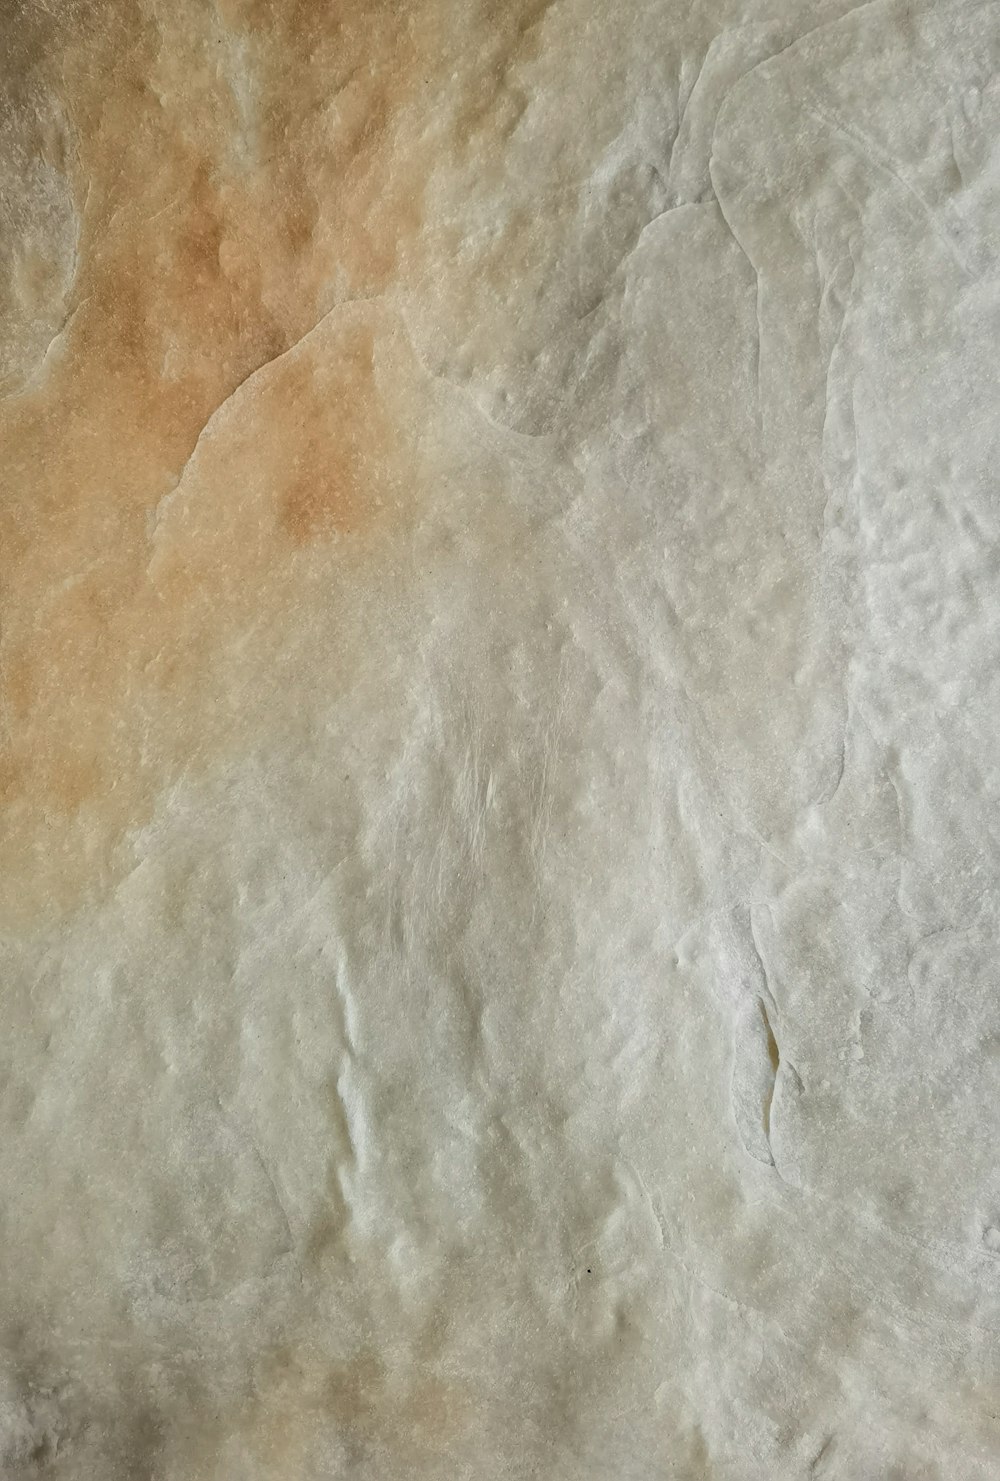 a close up of a piece of food on a table